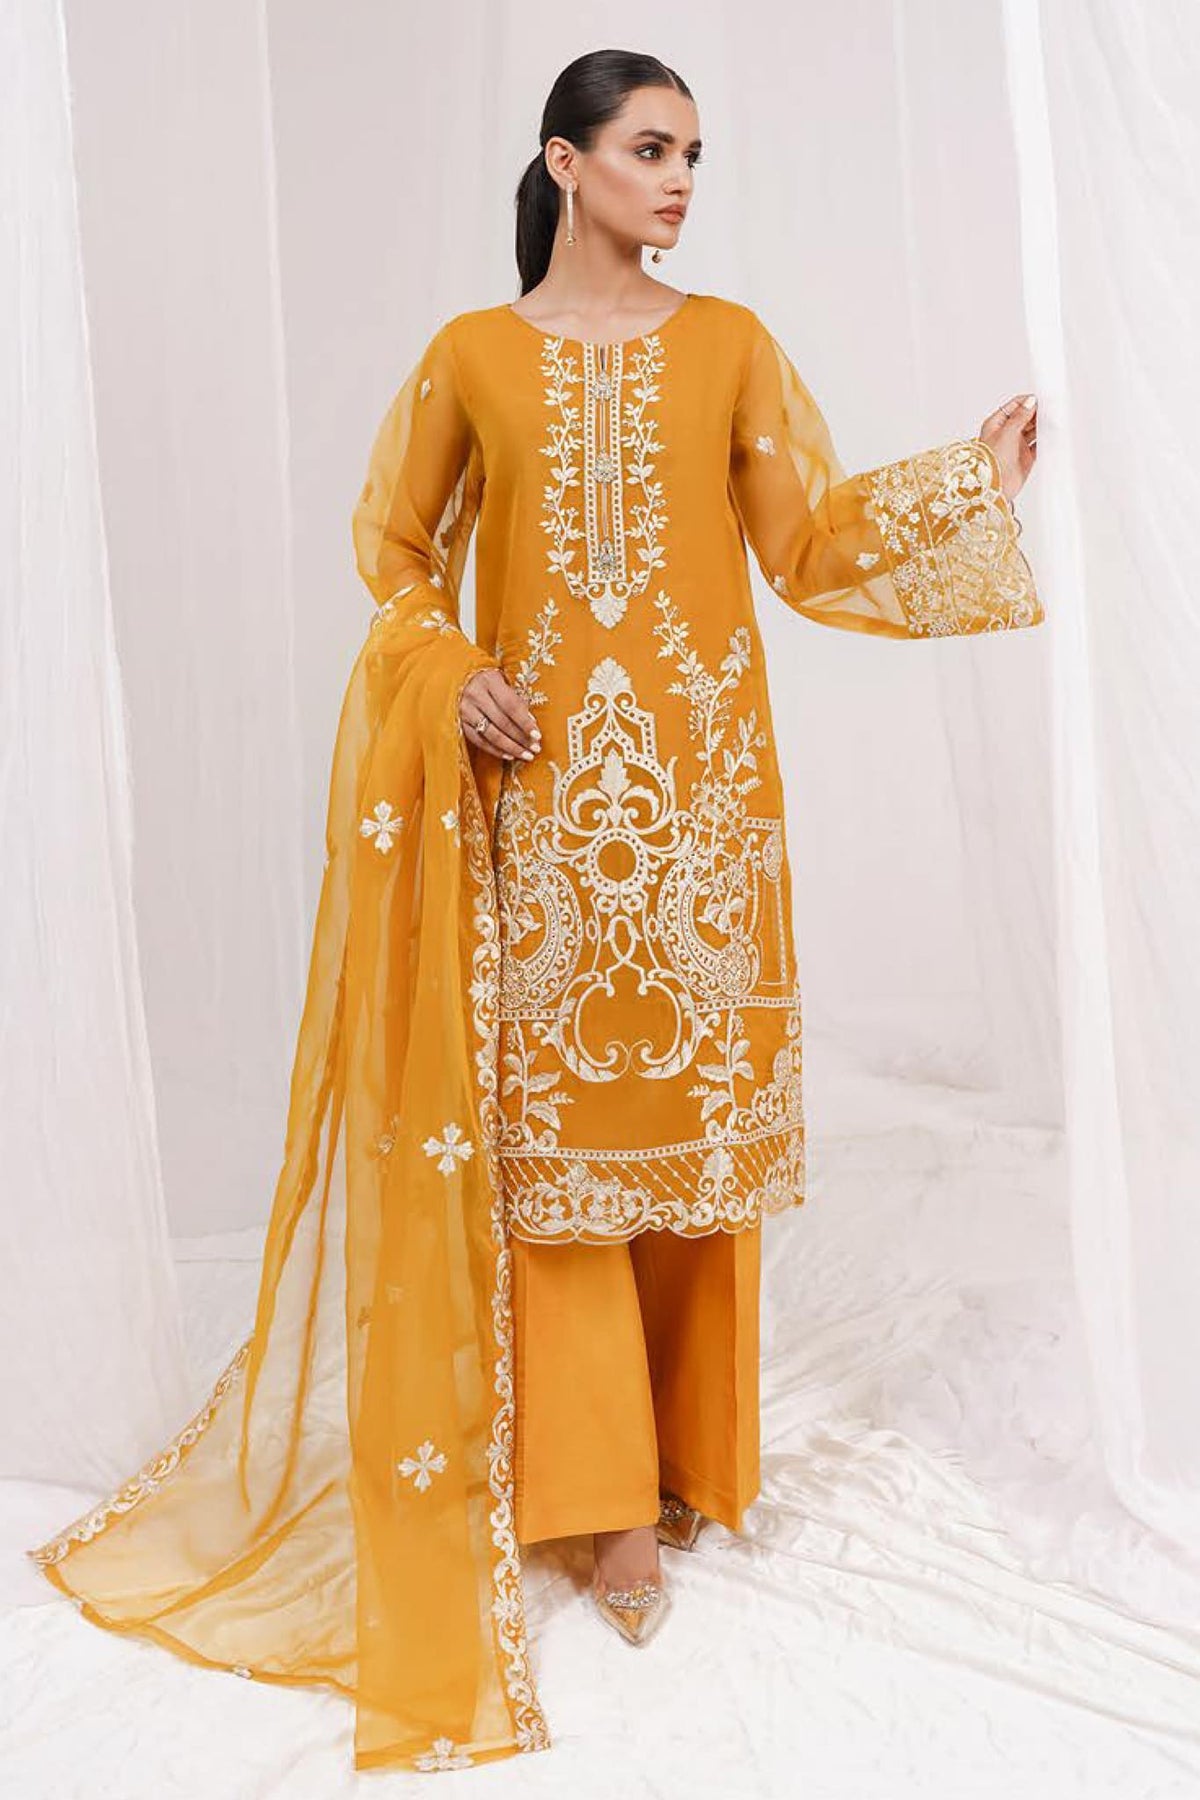 Mersin by Esra Stitched 2 Piece Festive Organza Collection'2022-ME-02-Yellow